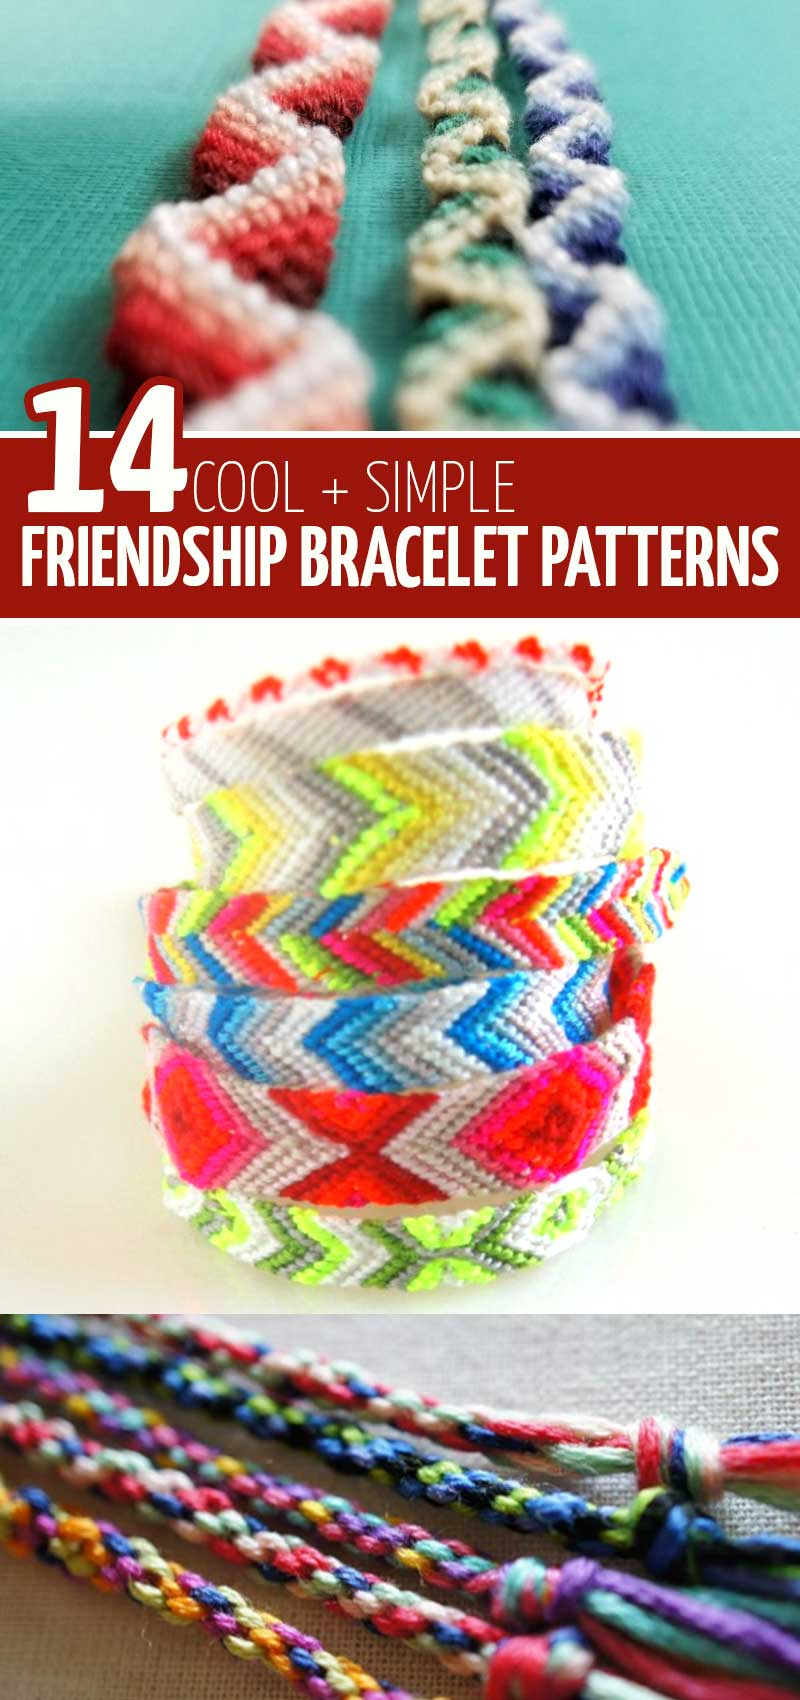 Embroidery Floss Bracelet Patterns Diy Friendship Bracelet Tutorials And Patterns Moms And Crafters